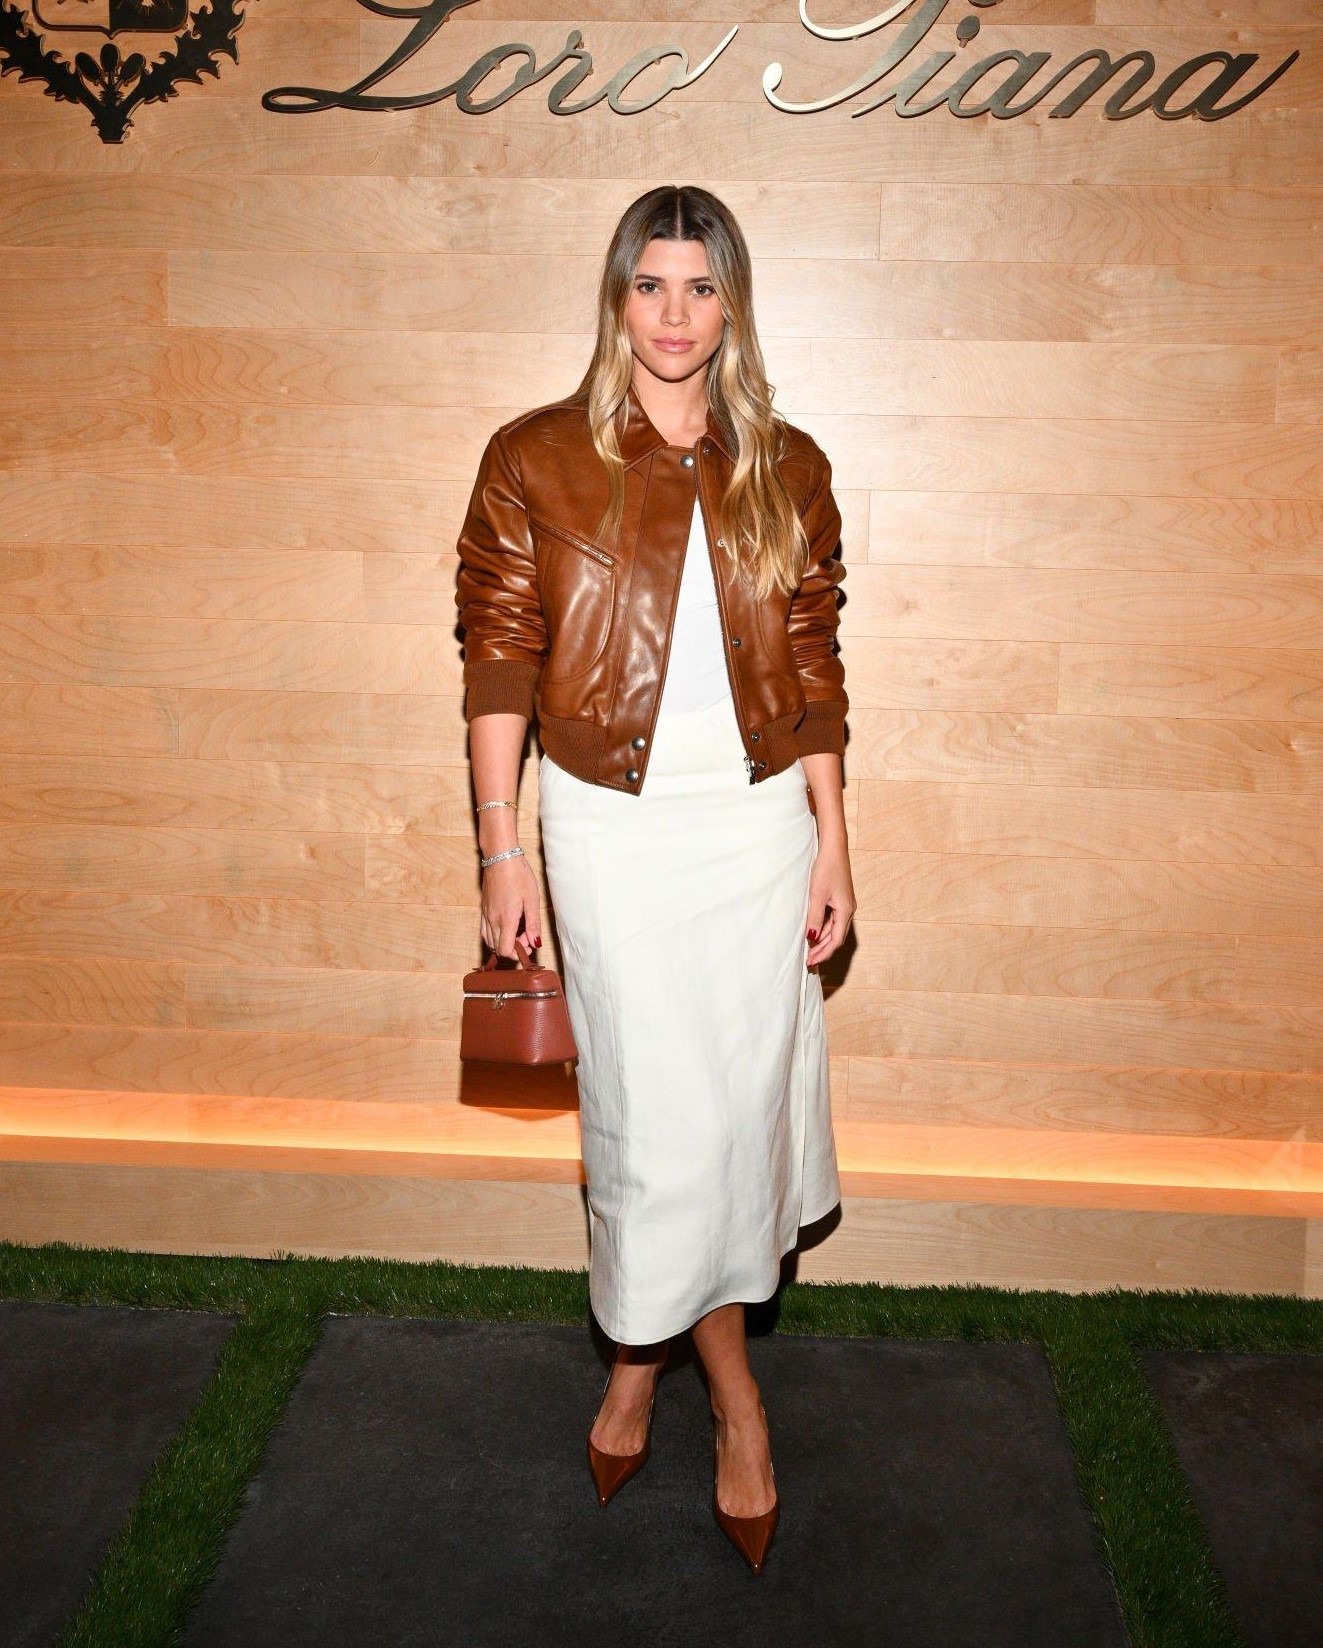 Sofia Richie - Loro Piana Collection Launch | Lucy Hale style